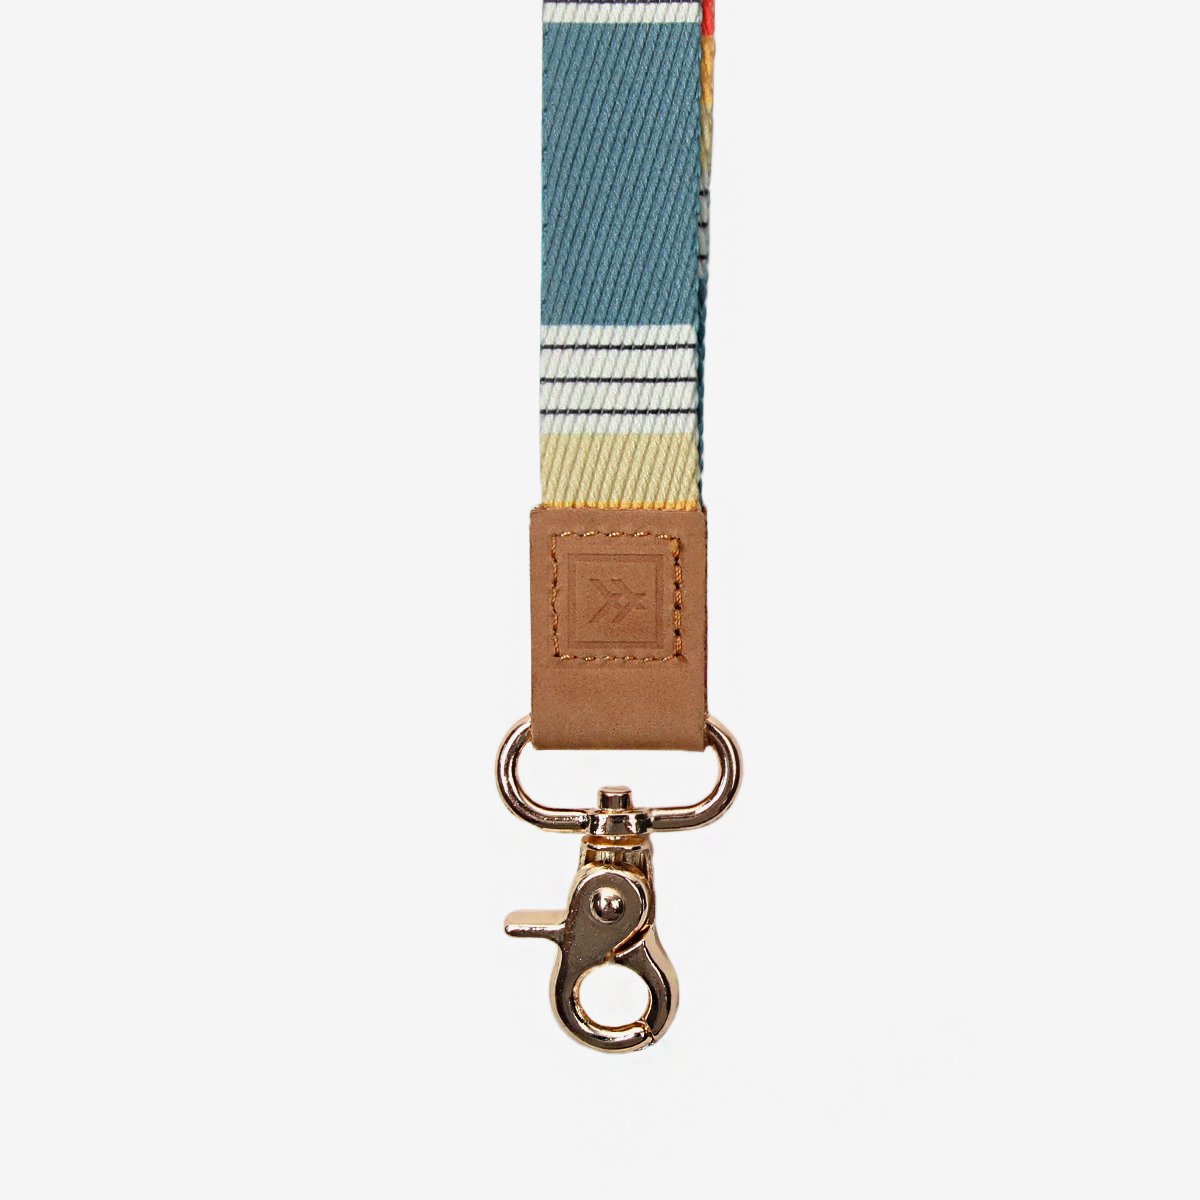 Blue, white, and red striped neck lanyard